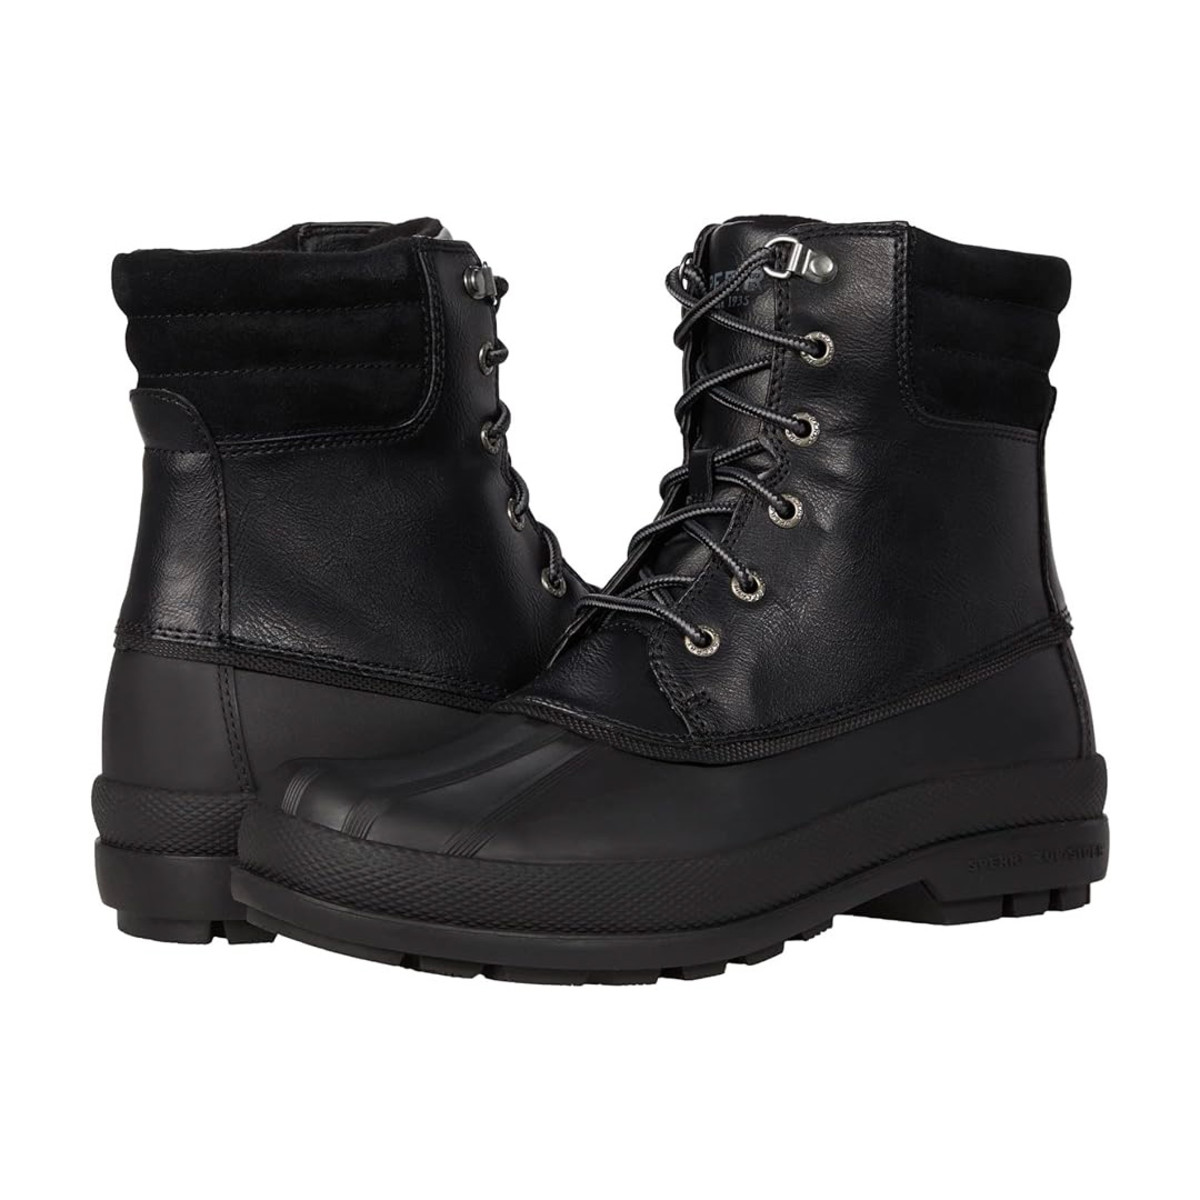 A Top Sperry Snow Boot for Men Is Now 52% Off at Zappos - Men's Journal